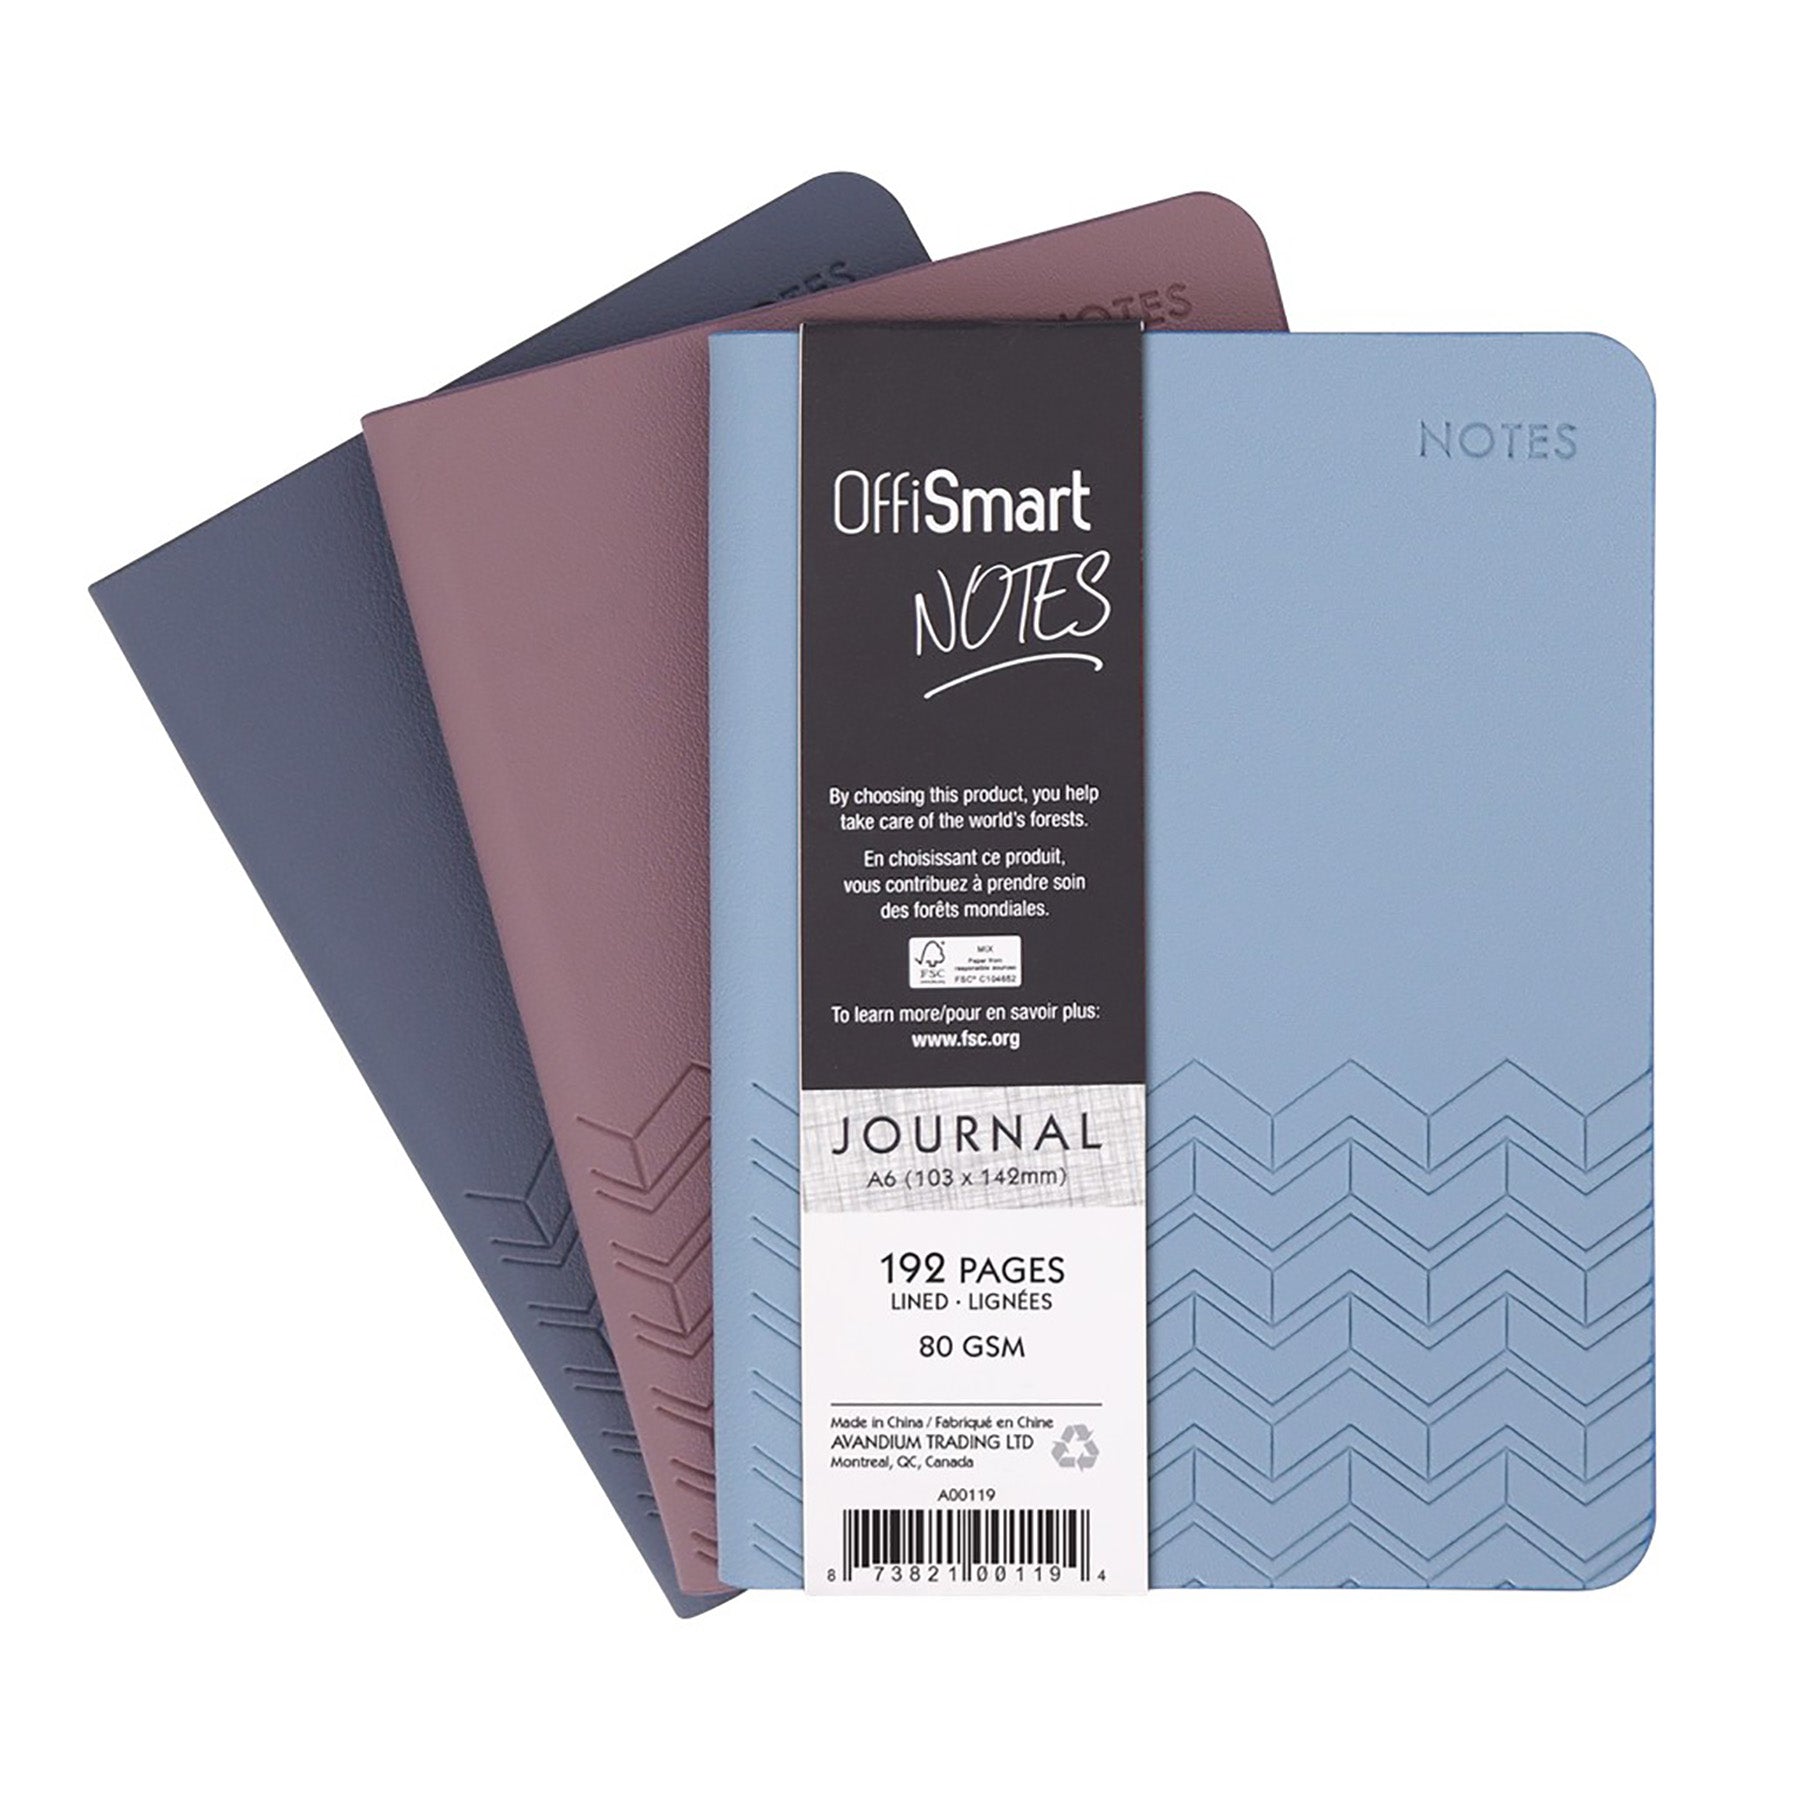 Offismart Soft-Touch Leatherette Notebook A6 192 Lined Pages 4x6in